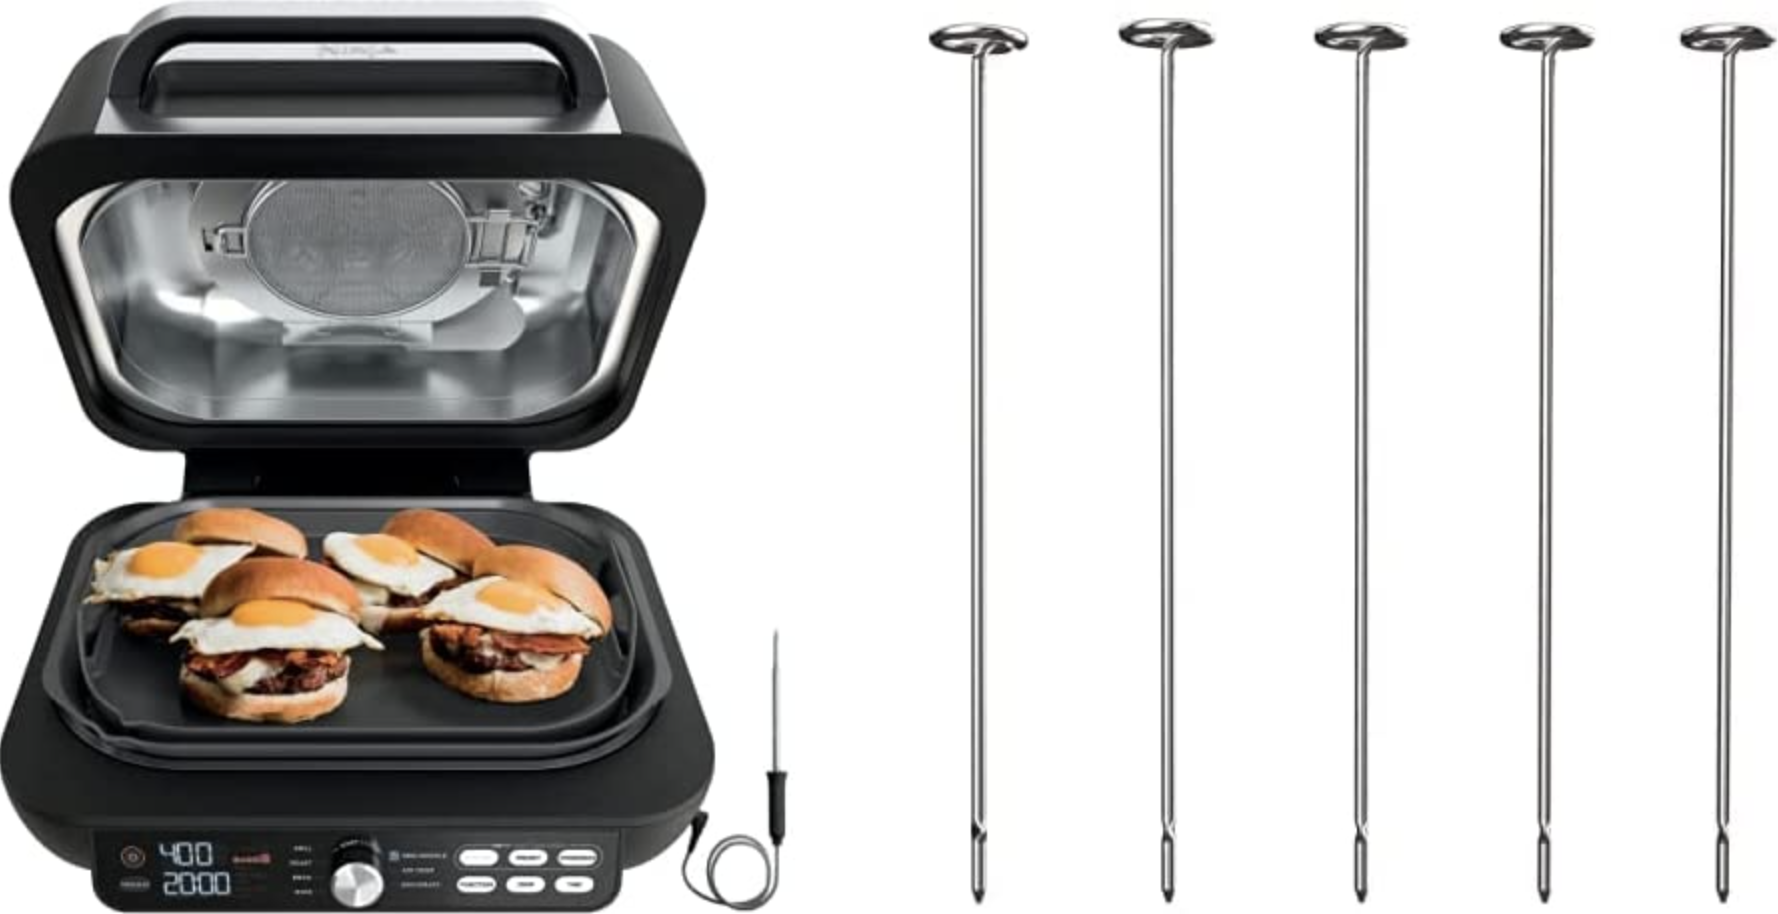 The black griddle with four silver skewers next to it